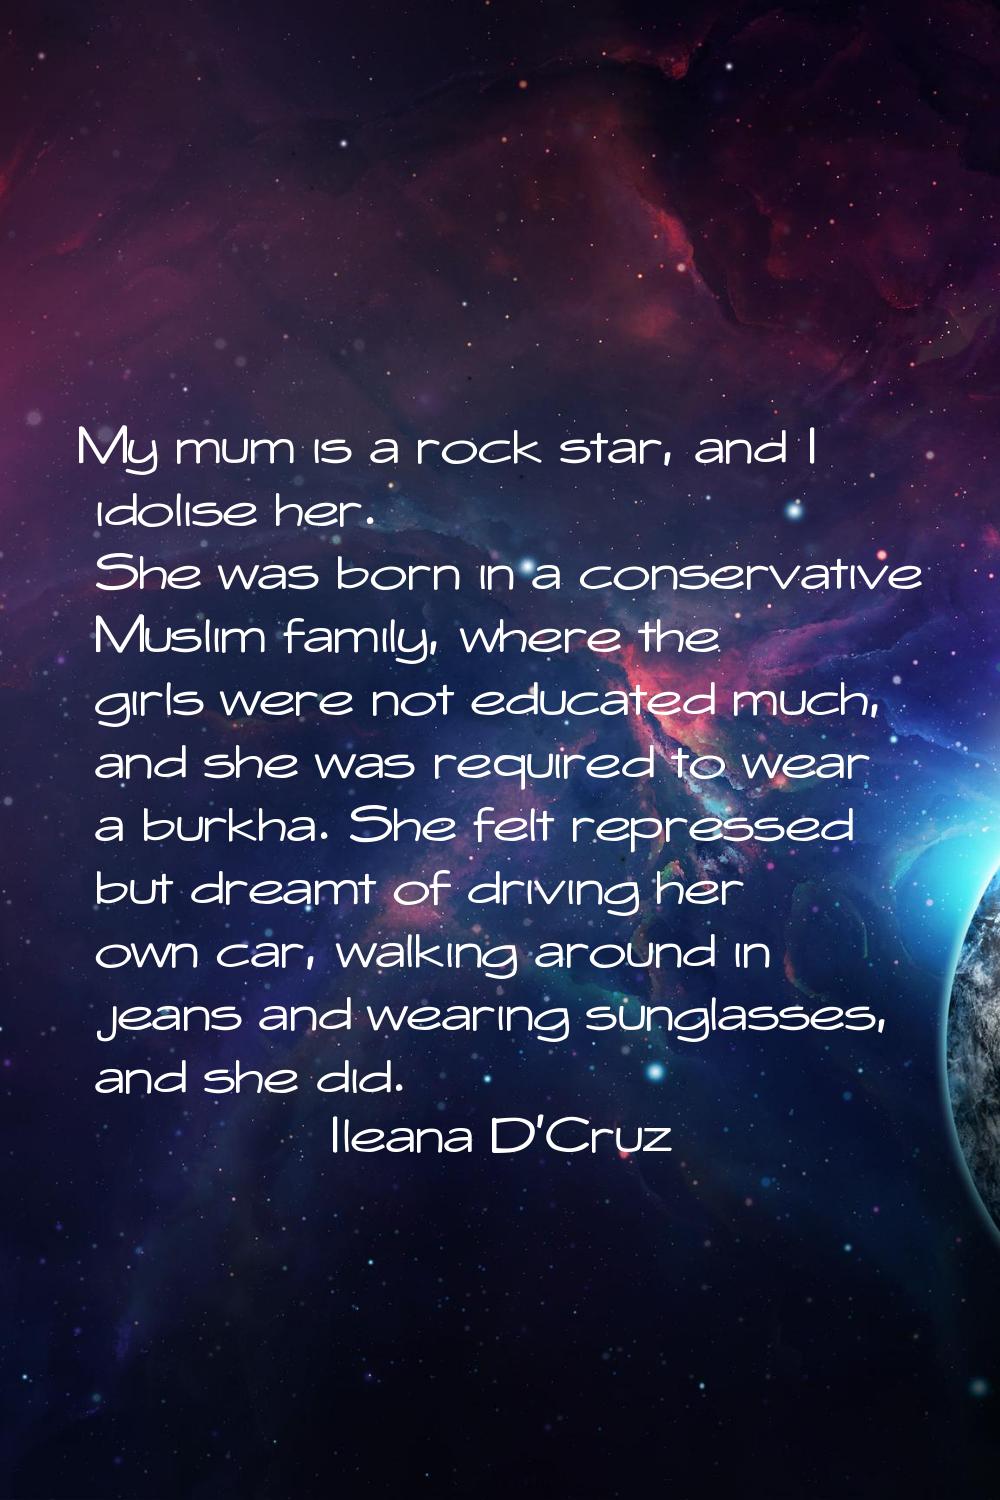 My mum is a rock star, and I idolise her. She was born in a conservative Muslim family, where the g